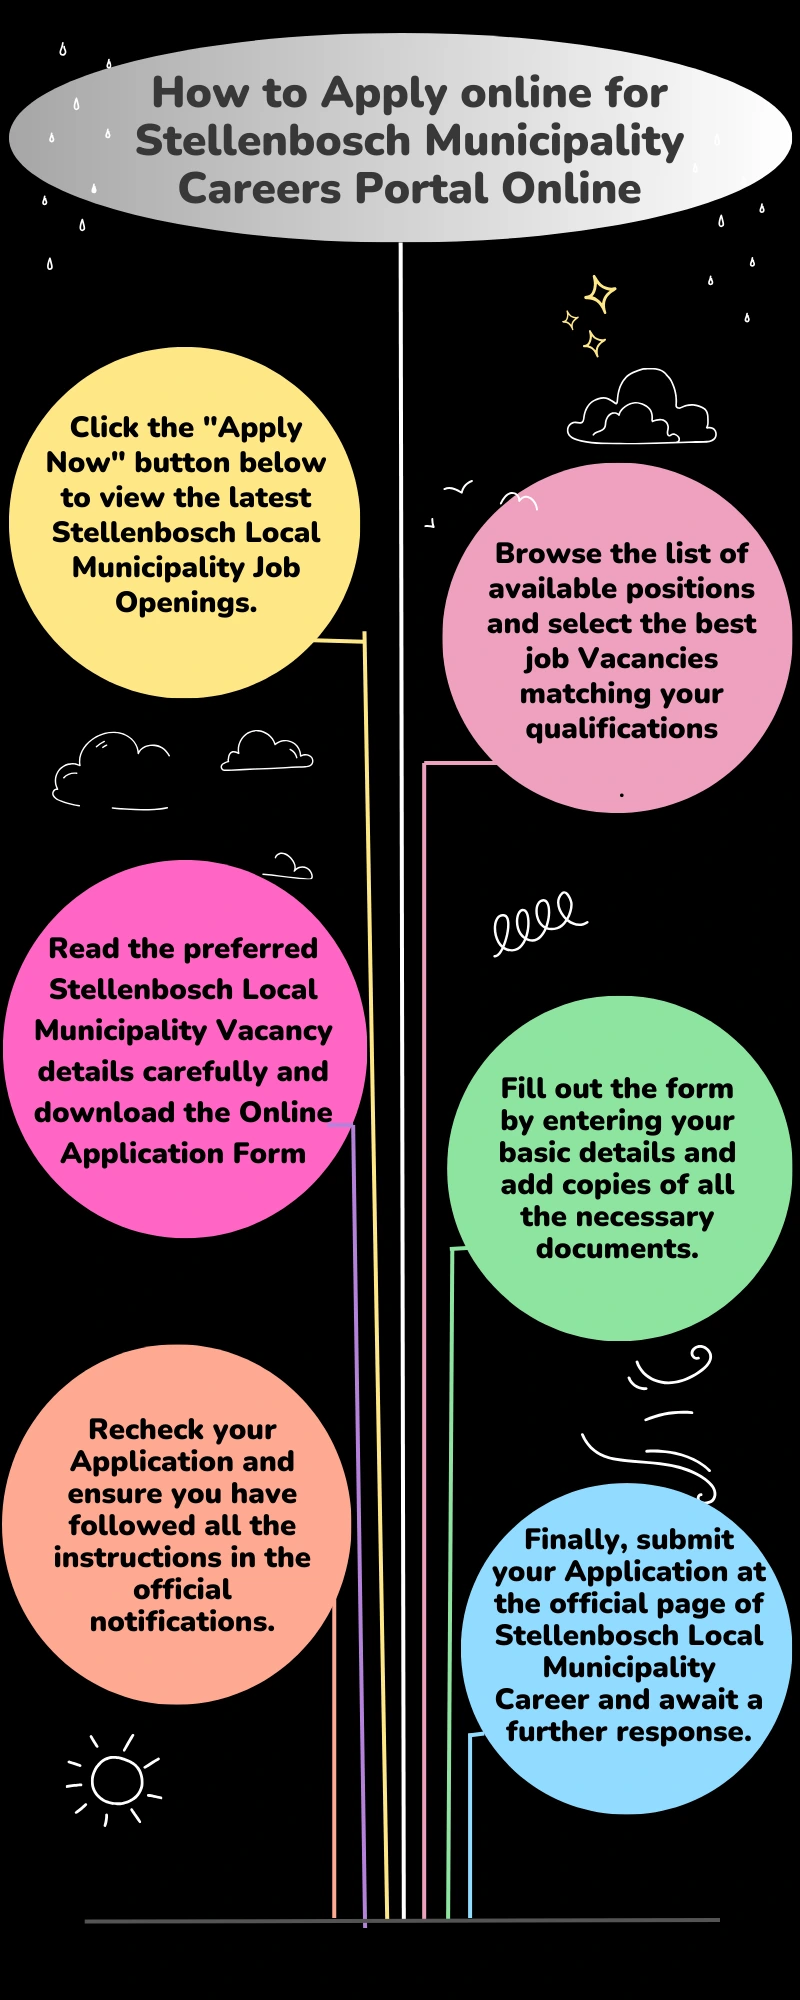 How to Apply online for Stellenbosch Municipality Careers Portal Online